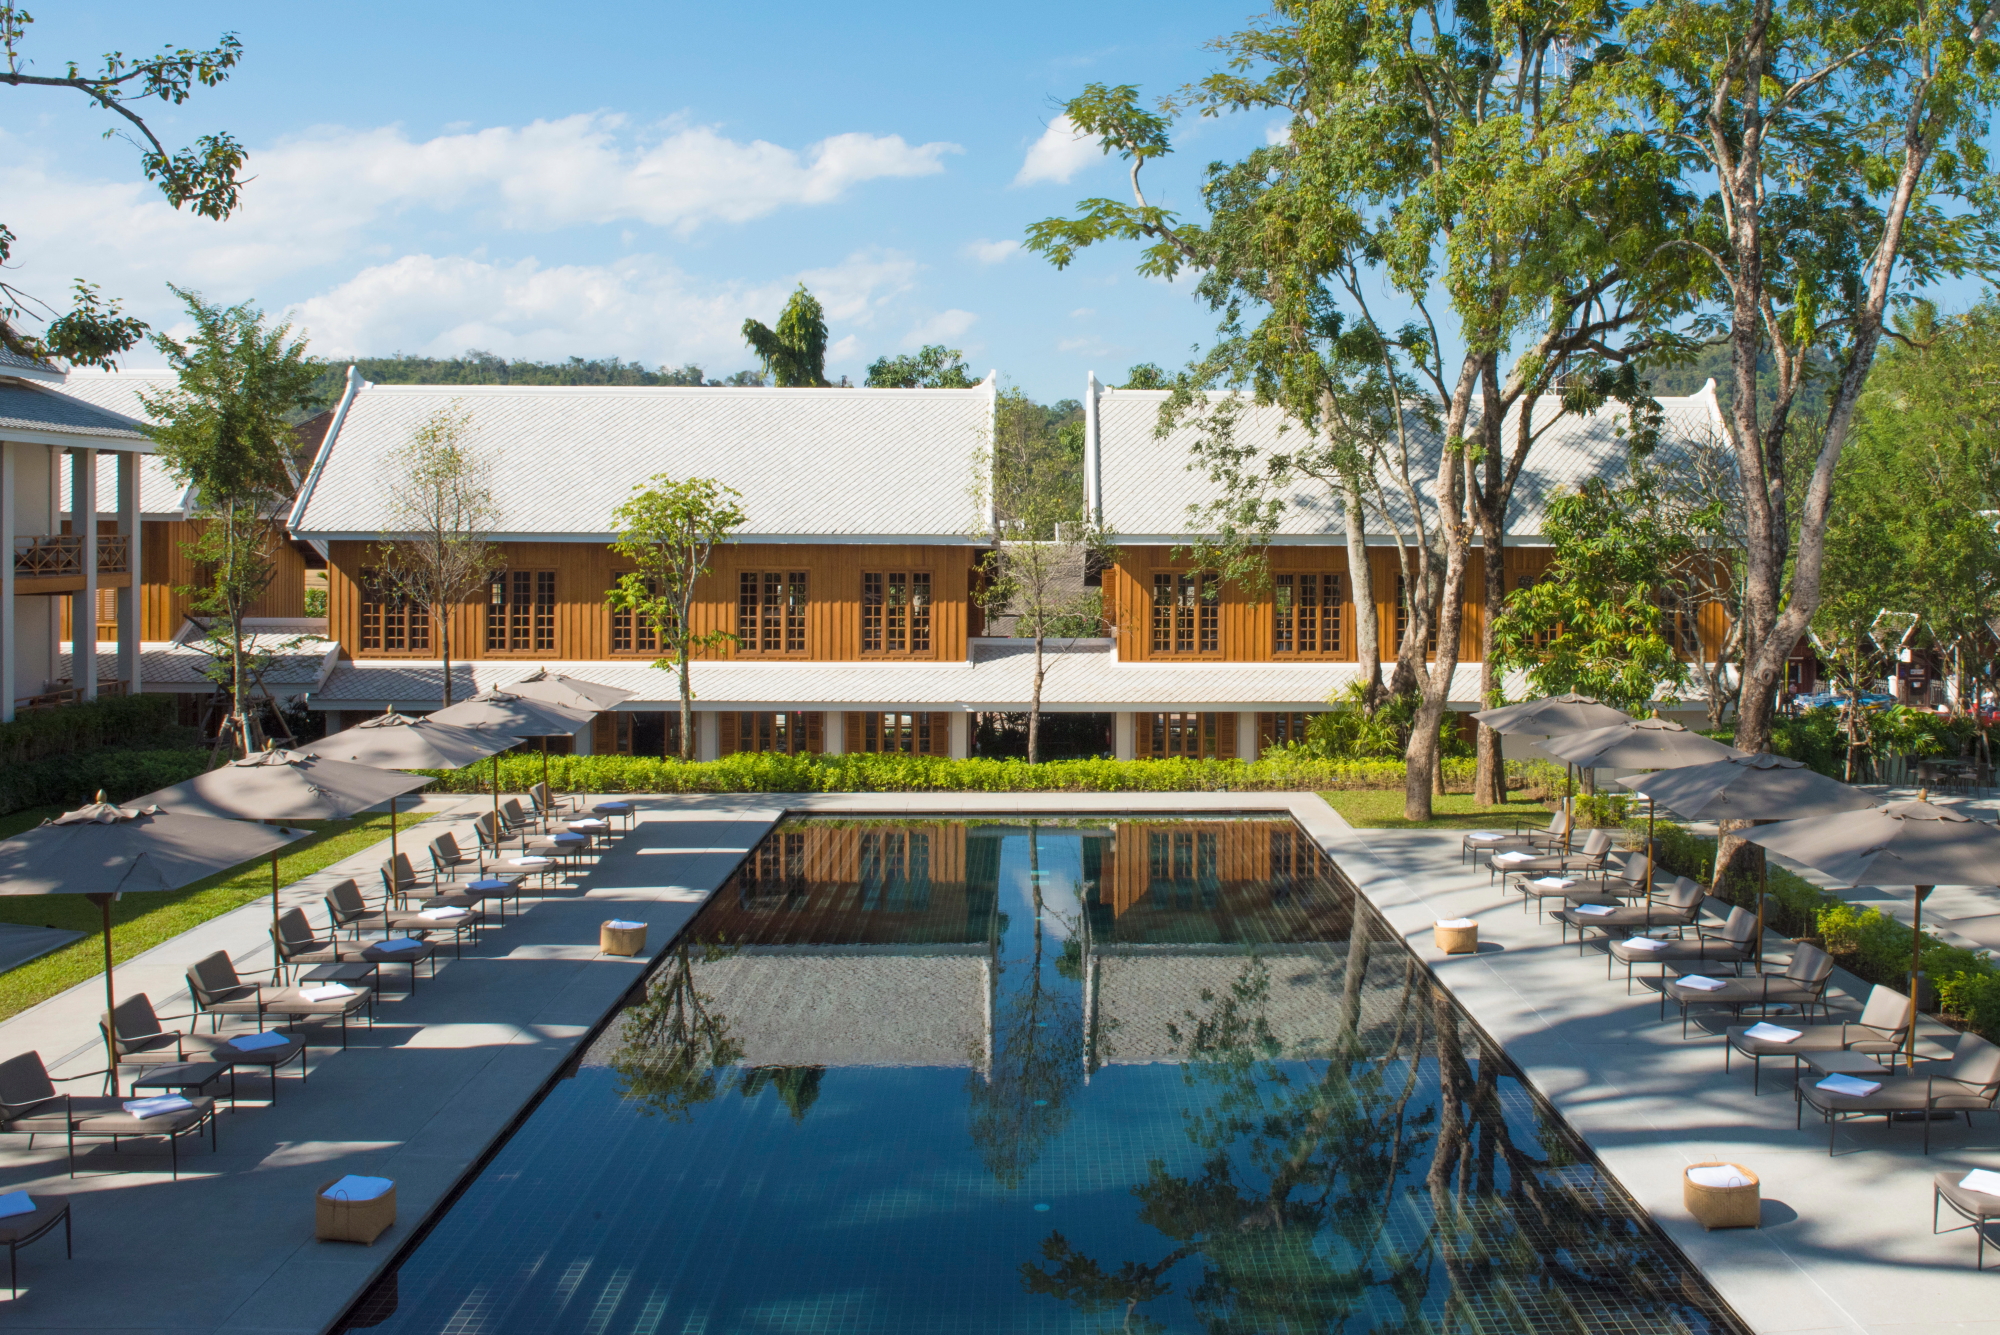 The Avani+ Luang Prabang opened today (1 March 2018). Click to enlarge.